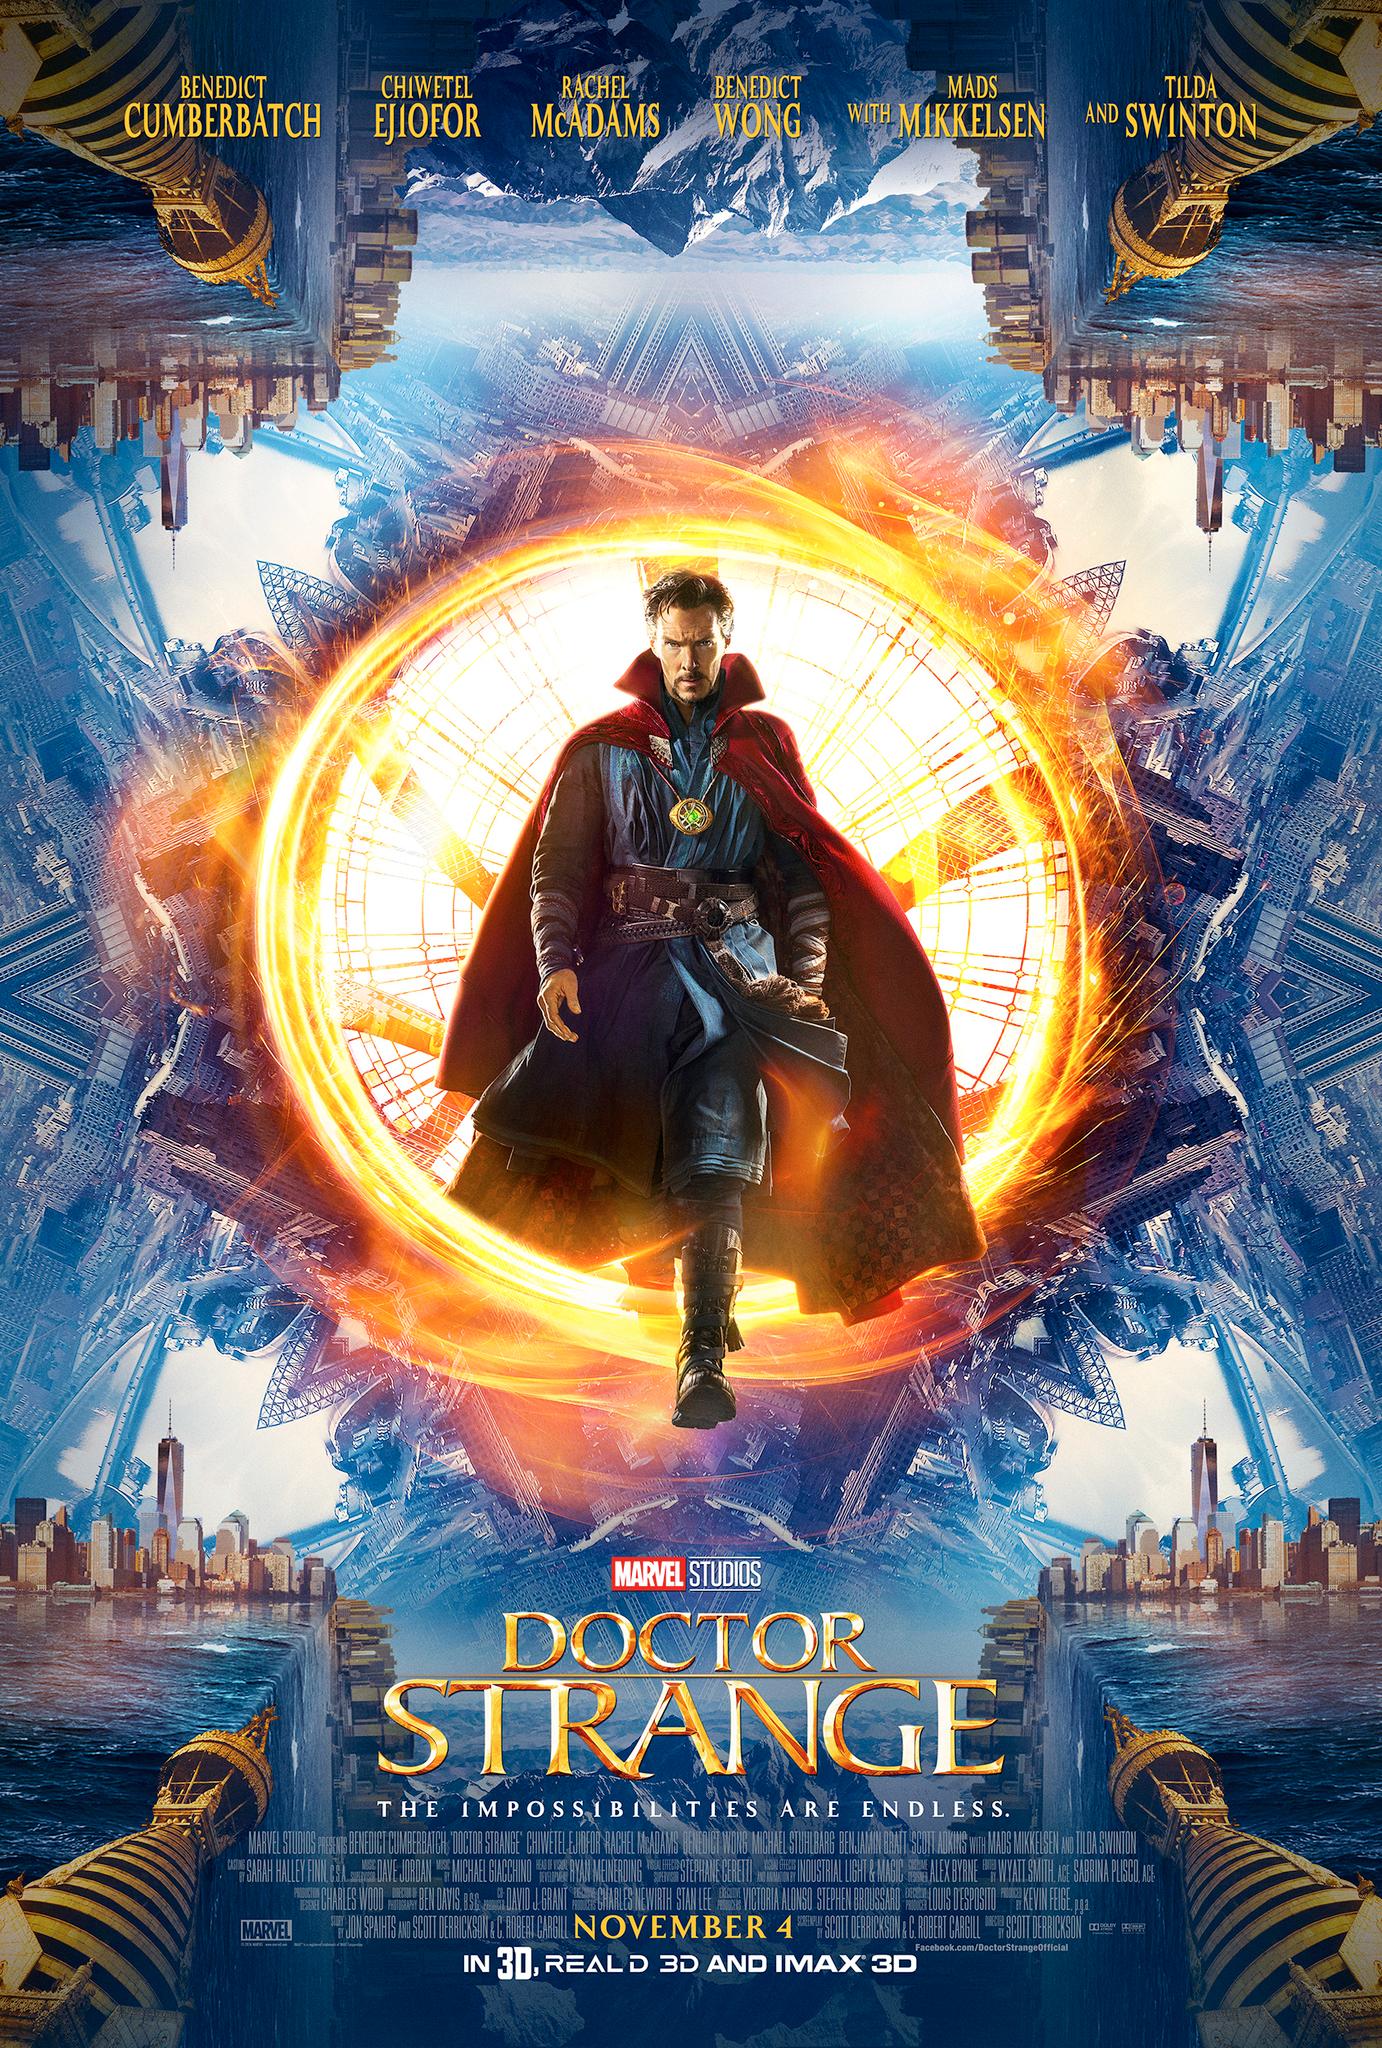 Doctor Strange (November 4, 2016) - Enter the mystical realm as brilliant neurosurgeon Stephen Strange embarks on a journey of self-discovery to become the Sorcerer Supreme.